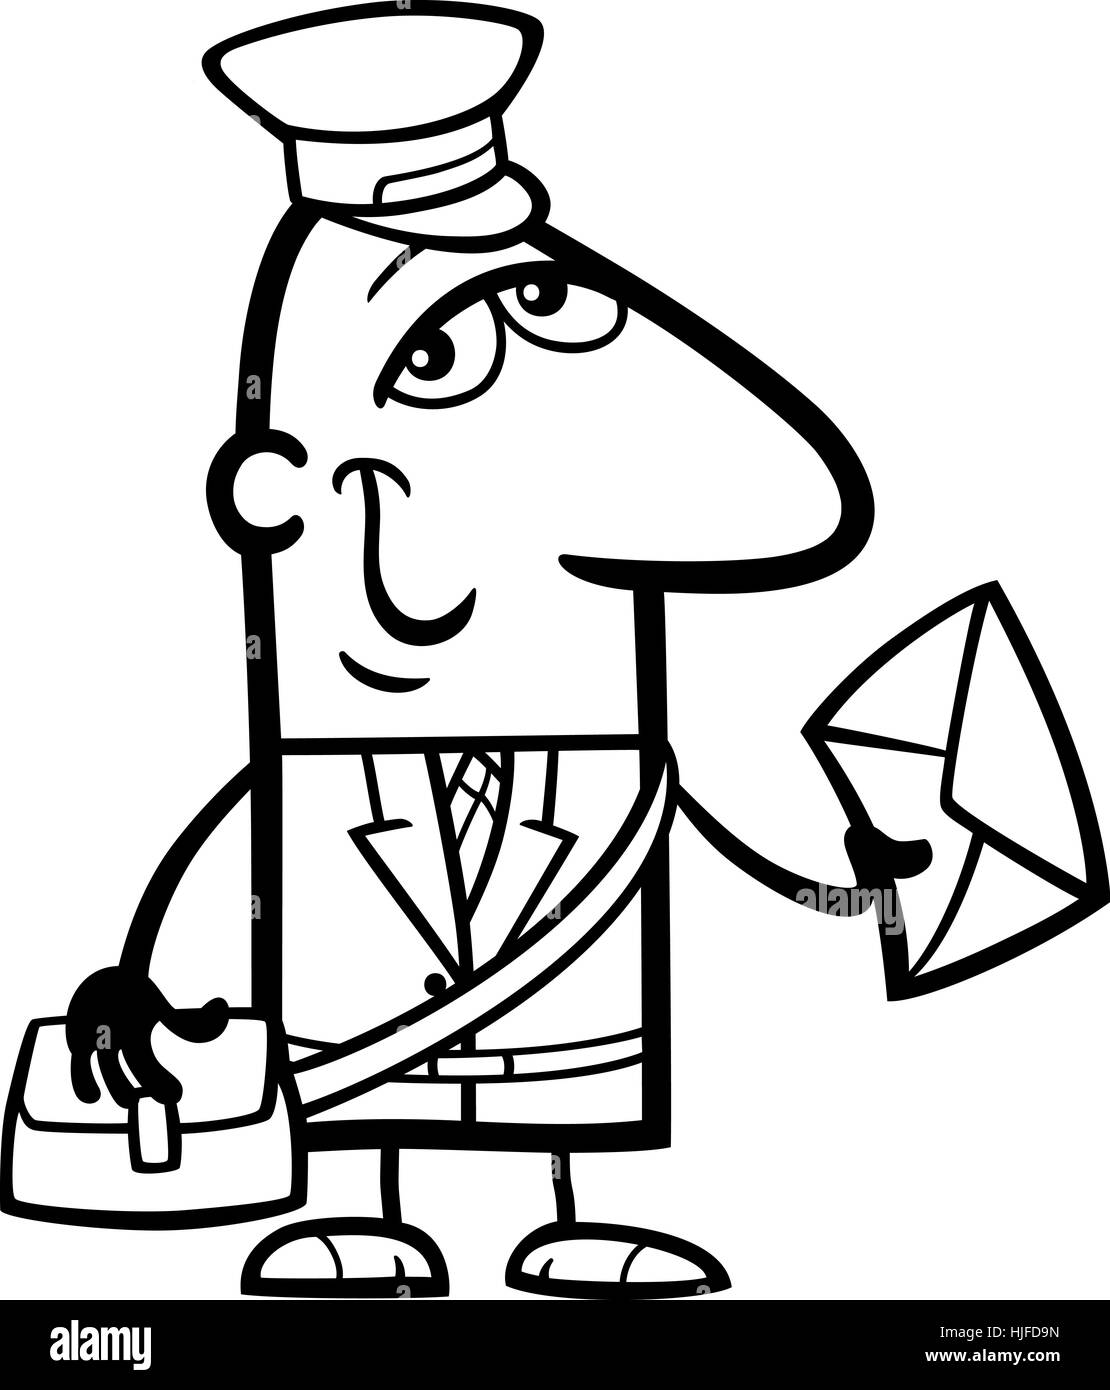 Black and White Cartoon Illustration of Funny Postman with Letter  Profession Occupation for Coloring Book Stock Photo - Alamy